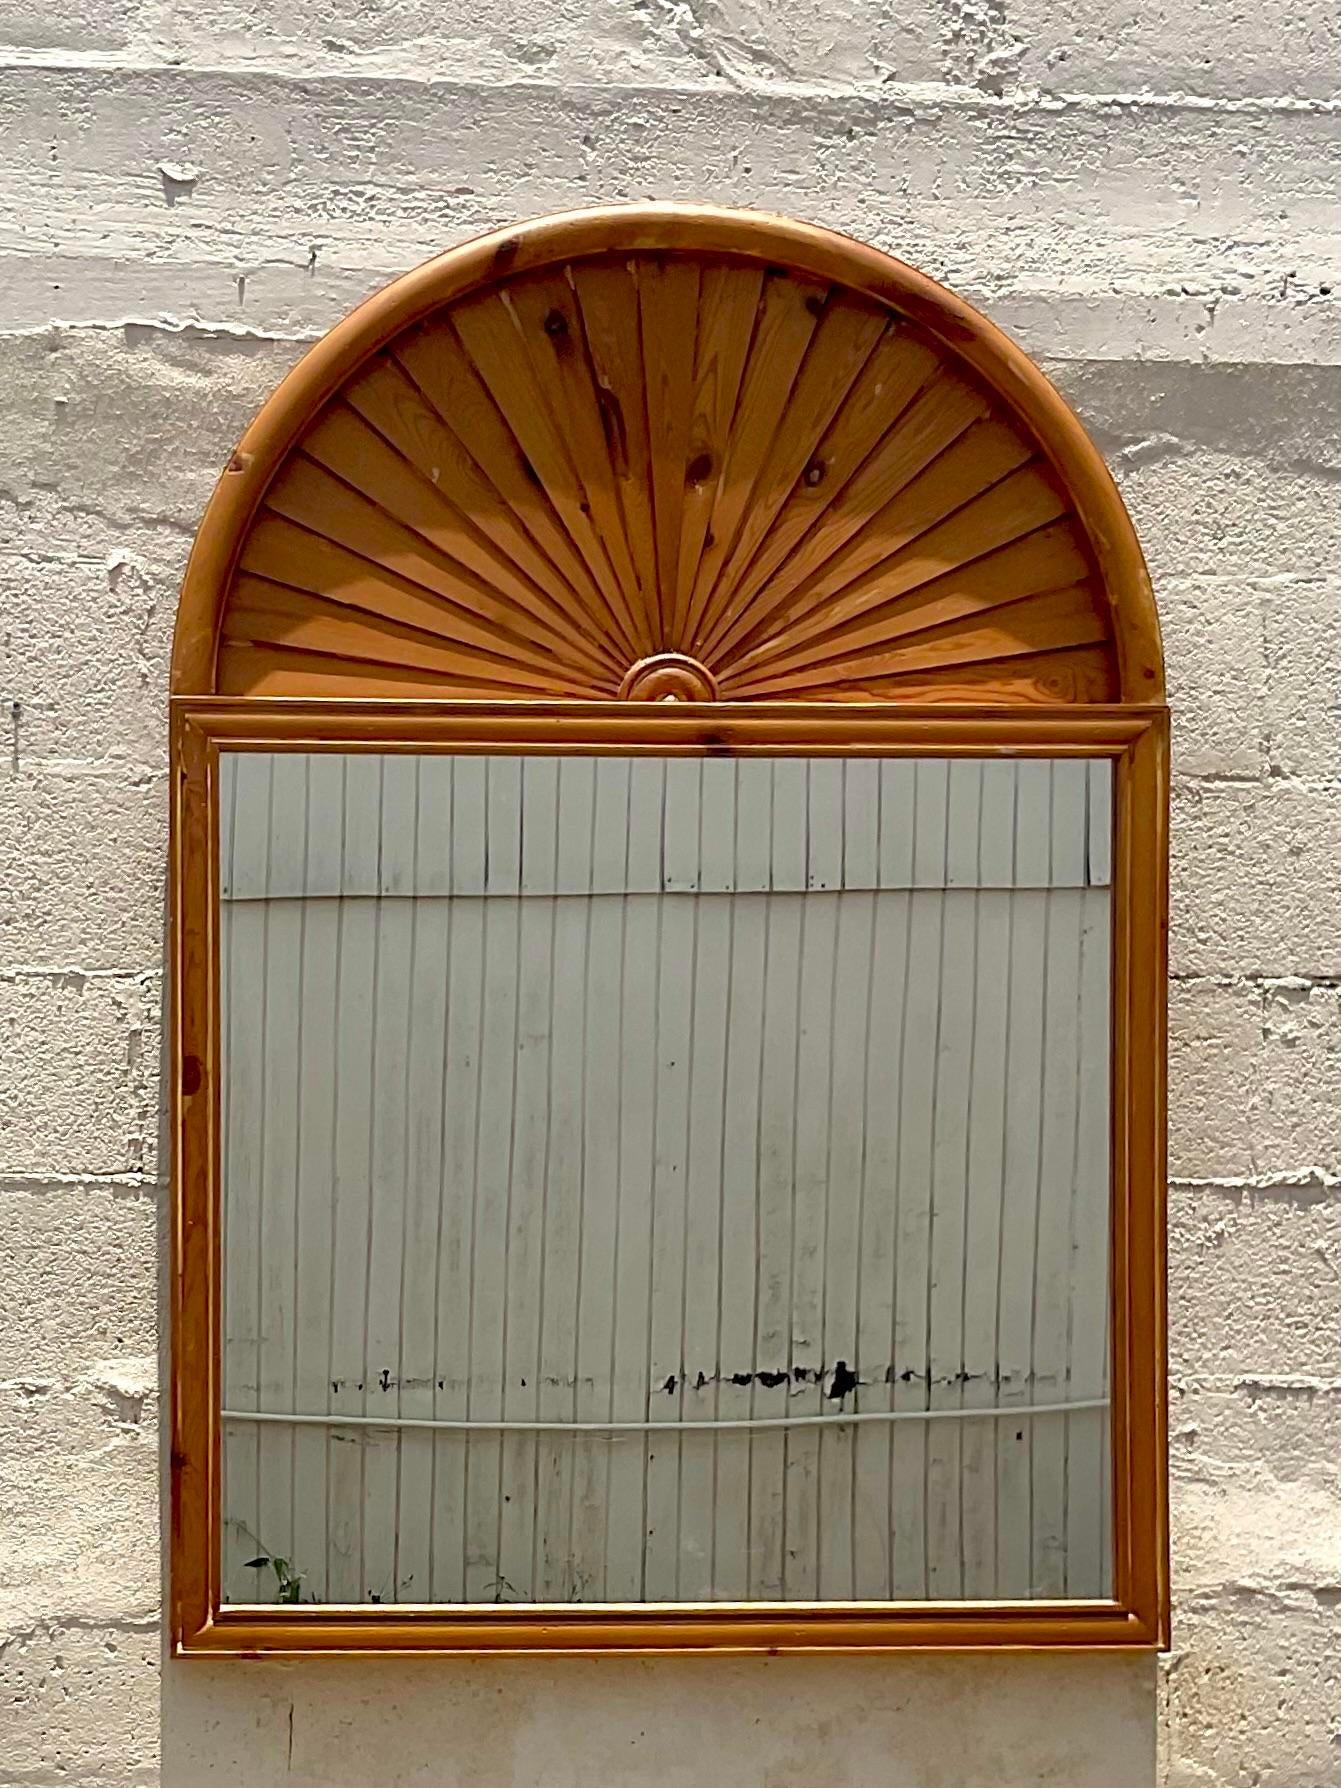 A fabulous vintage Boho wall mirror. A chic fan top design constructed in a knotty pine wood. Acquired from a Palm Beach estate. 